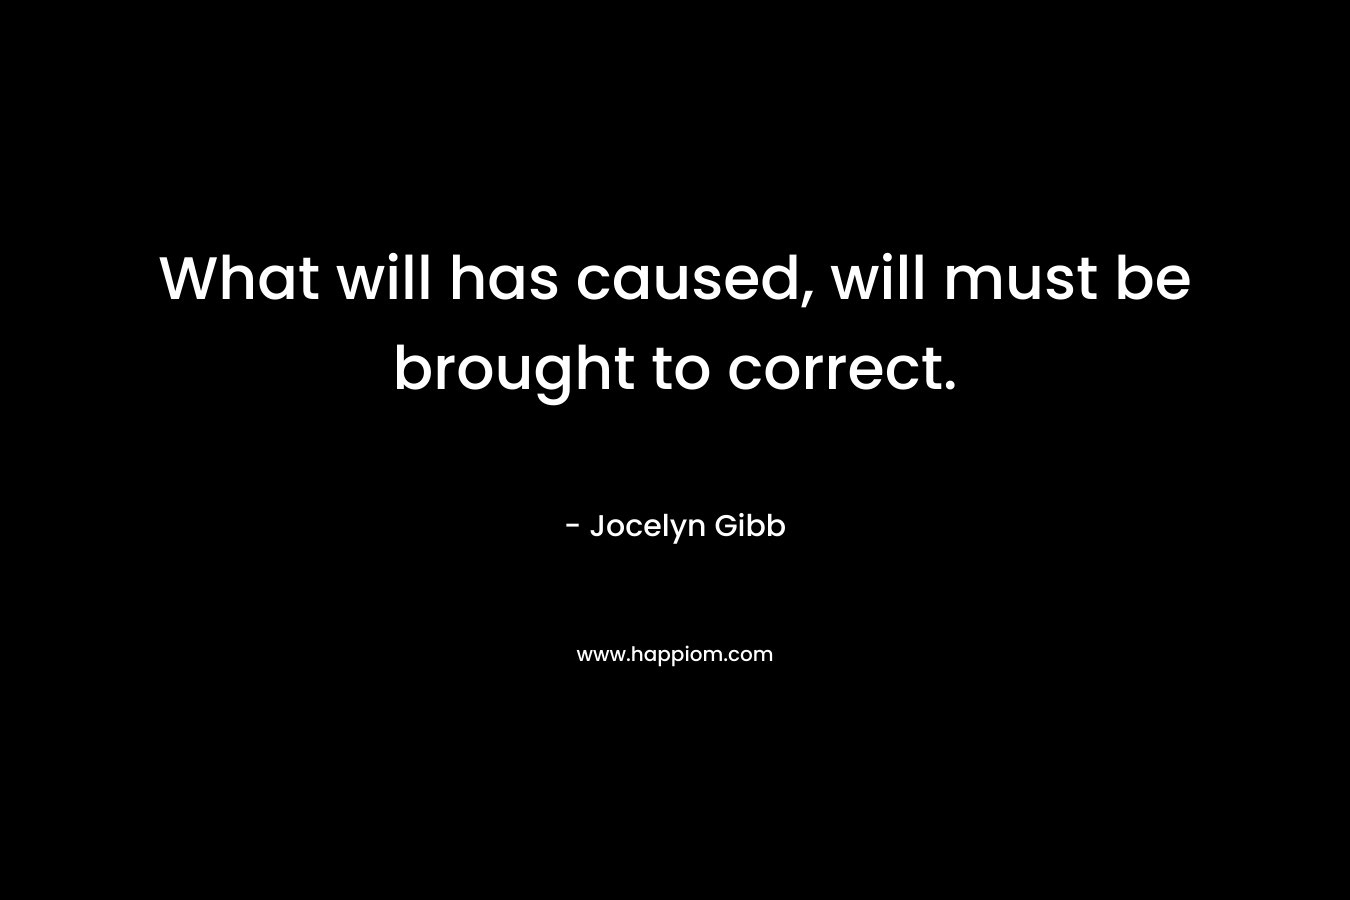 What will has caused, will must be brought to correct. – Jocelyn Gibb